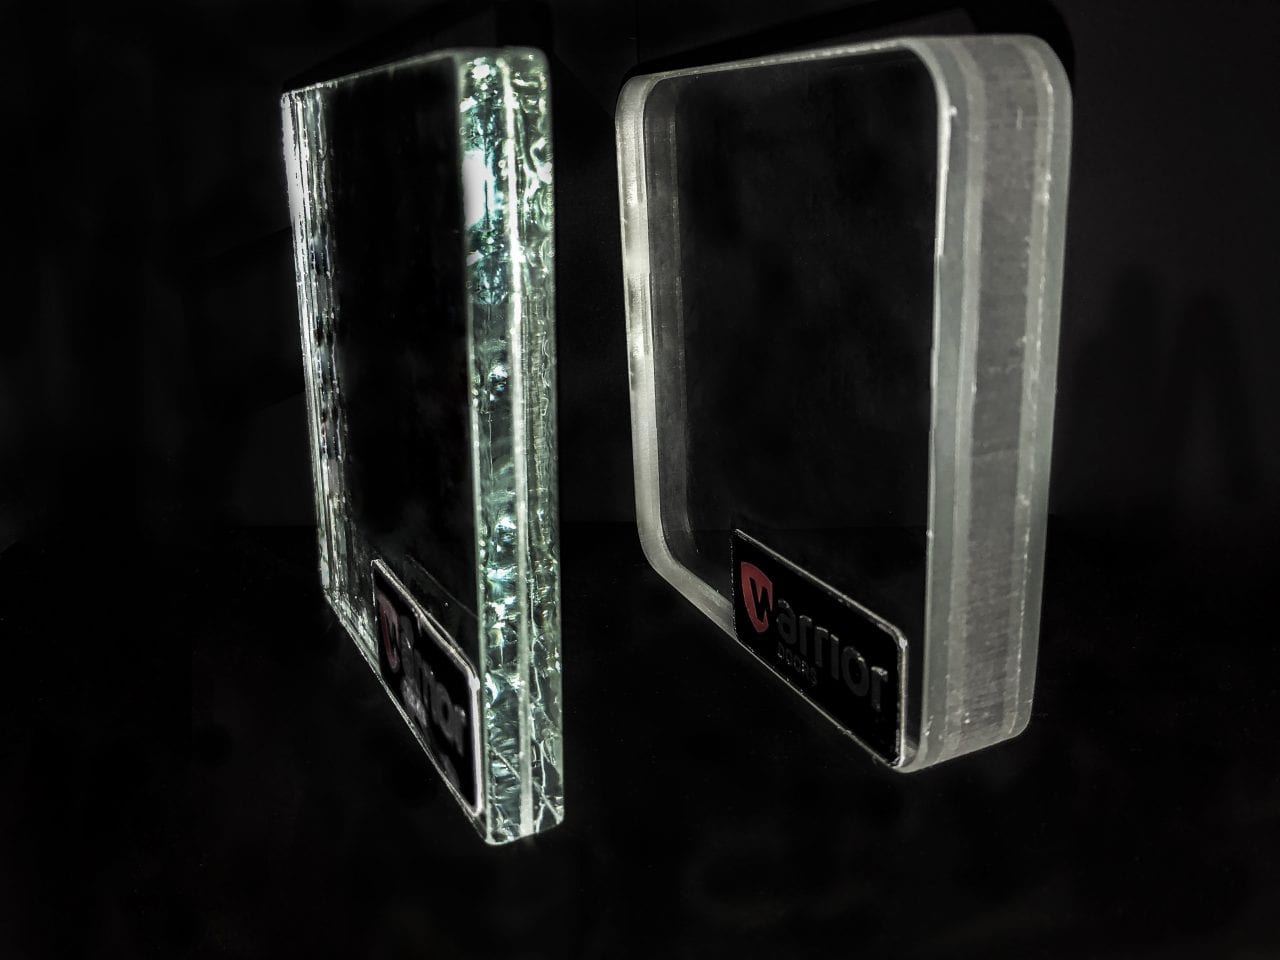 Anti-bandit Glass Sample next to LPS 1270 1,2,3 Glass Sample